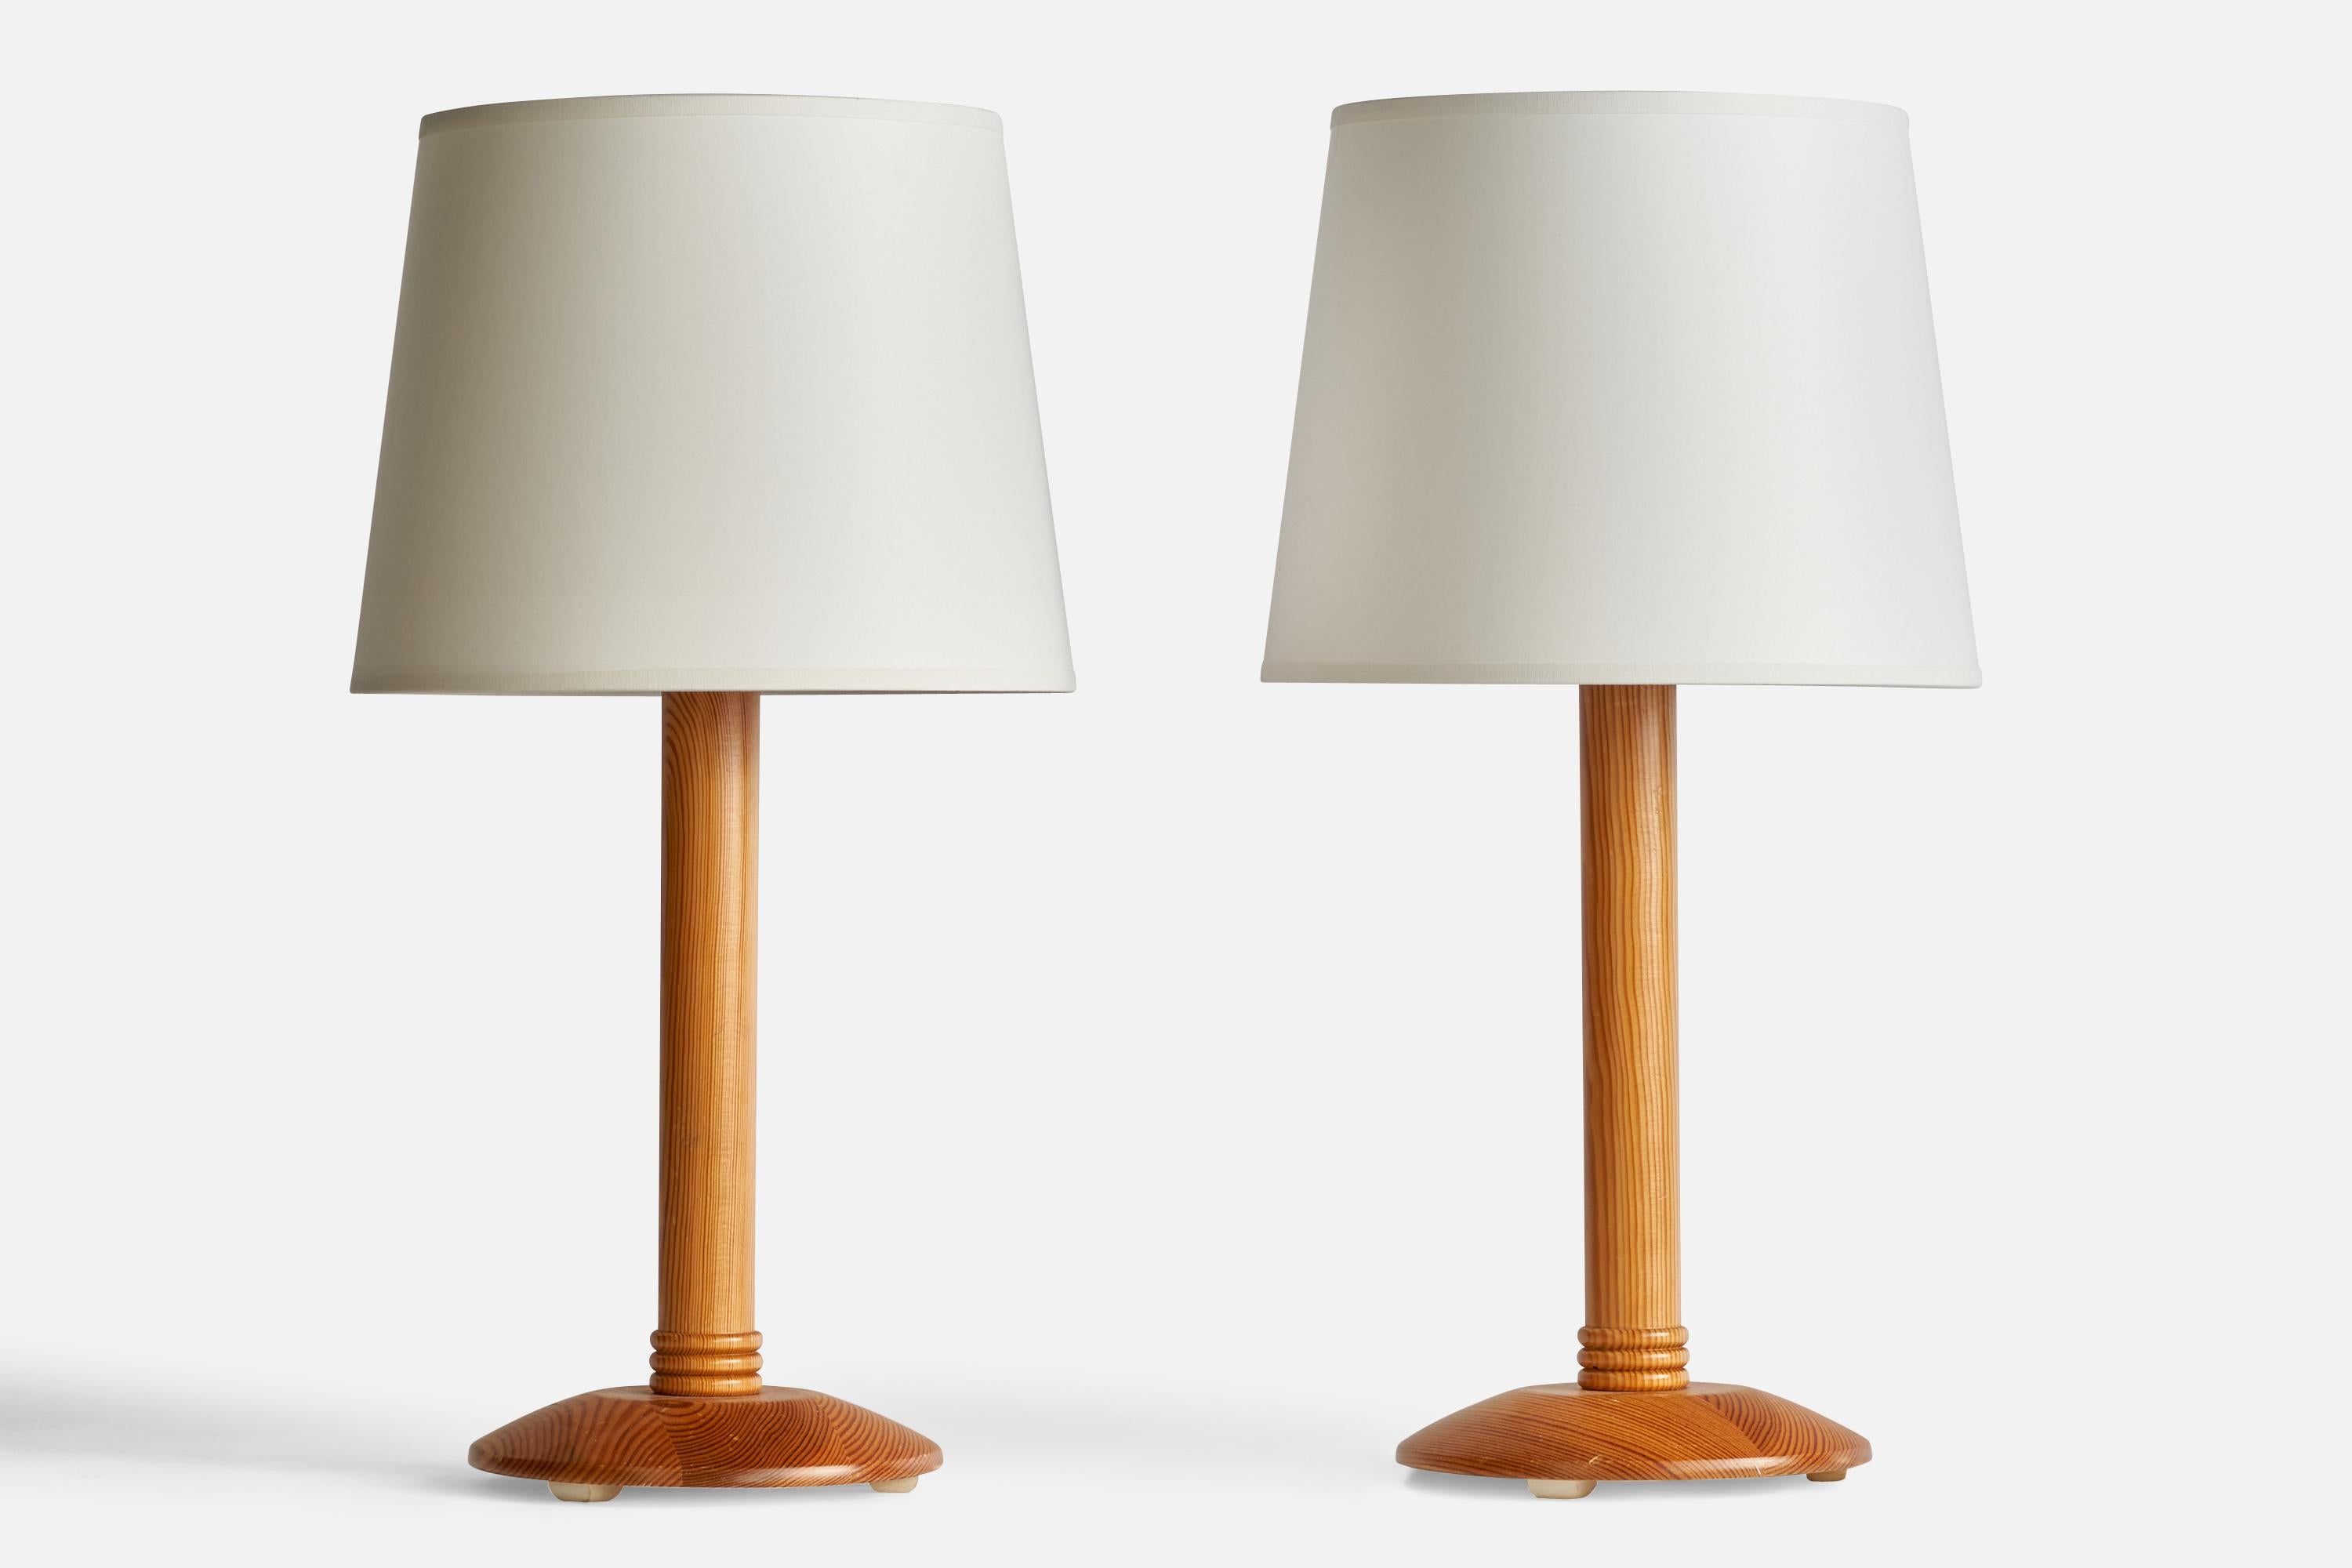 A pair of pine table lamps designed and produced in Sweden, c. 1970s.

Dimensions of Lamp (inches): 13.5” H x 6.5” Diameter
Dimensions of Shade (inches): 8” Top Diameter x 10” Bottom Diameter x 8” H
Dimensions of Lamp with Shade (inches): 19.25” H x